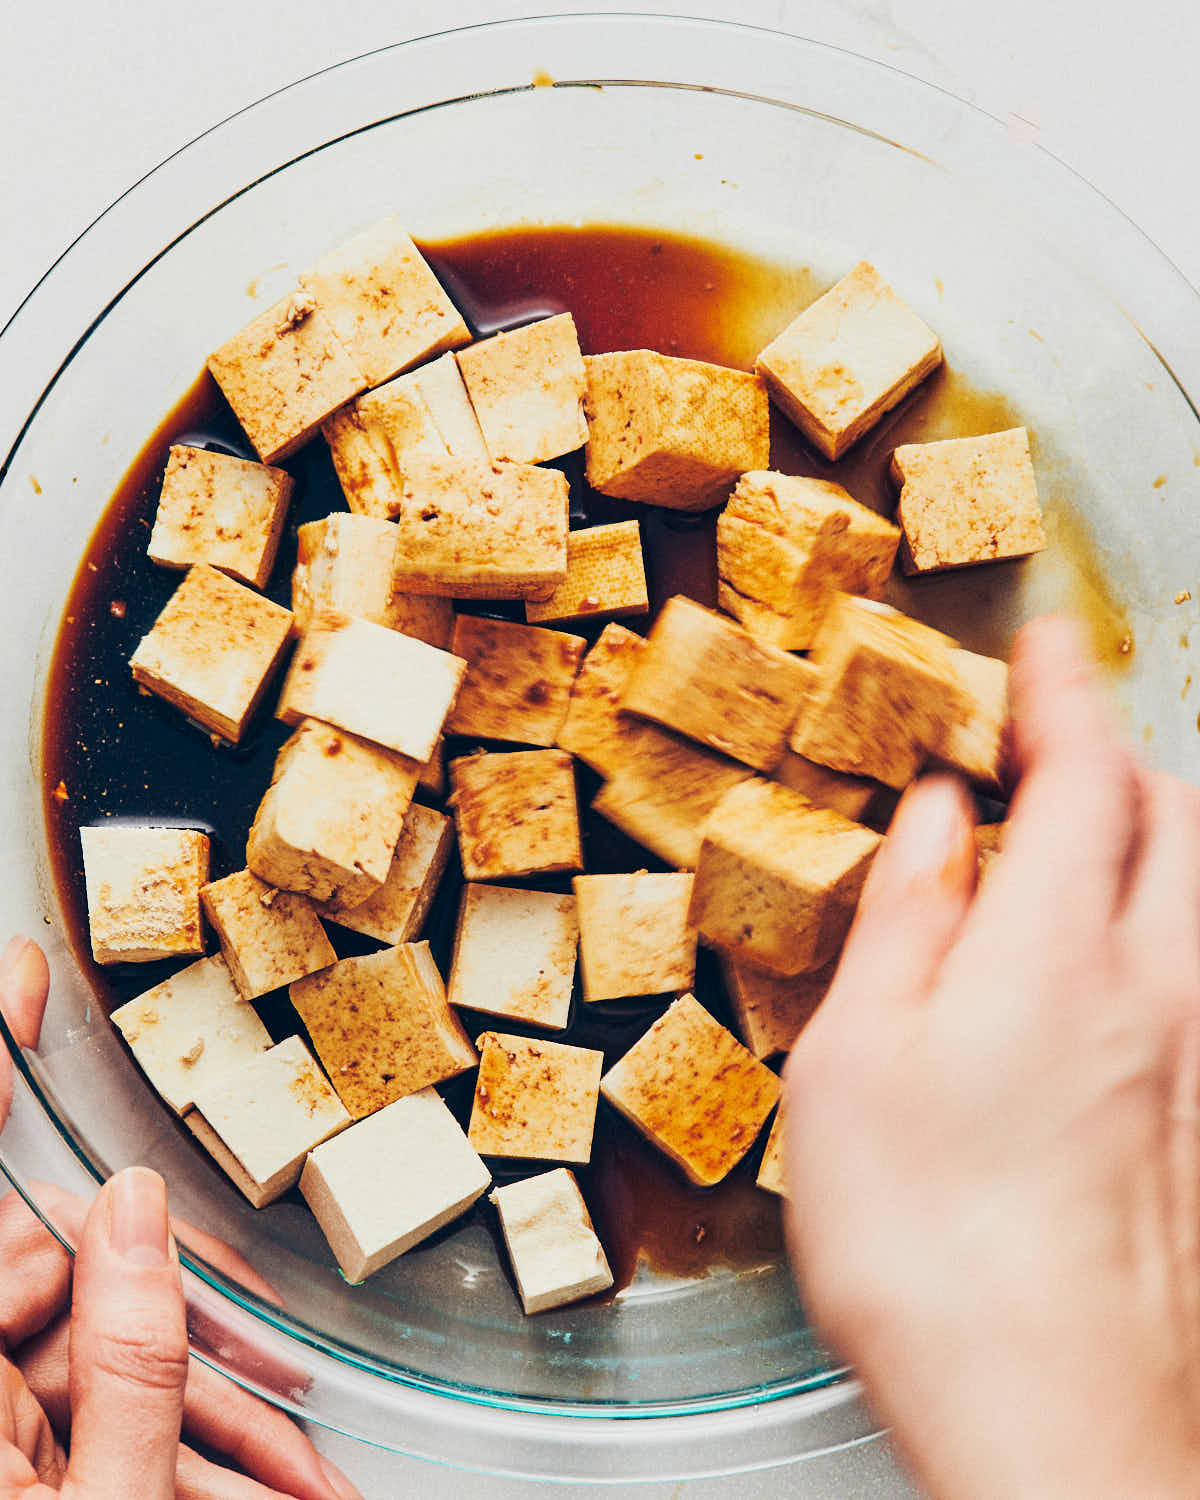 A hand tossing cubed tofu and tamari until the tofu is well coated